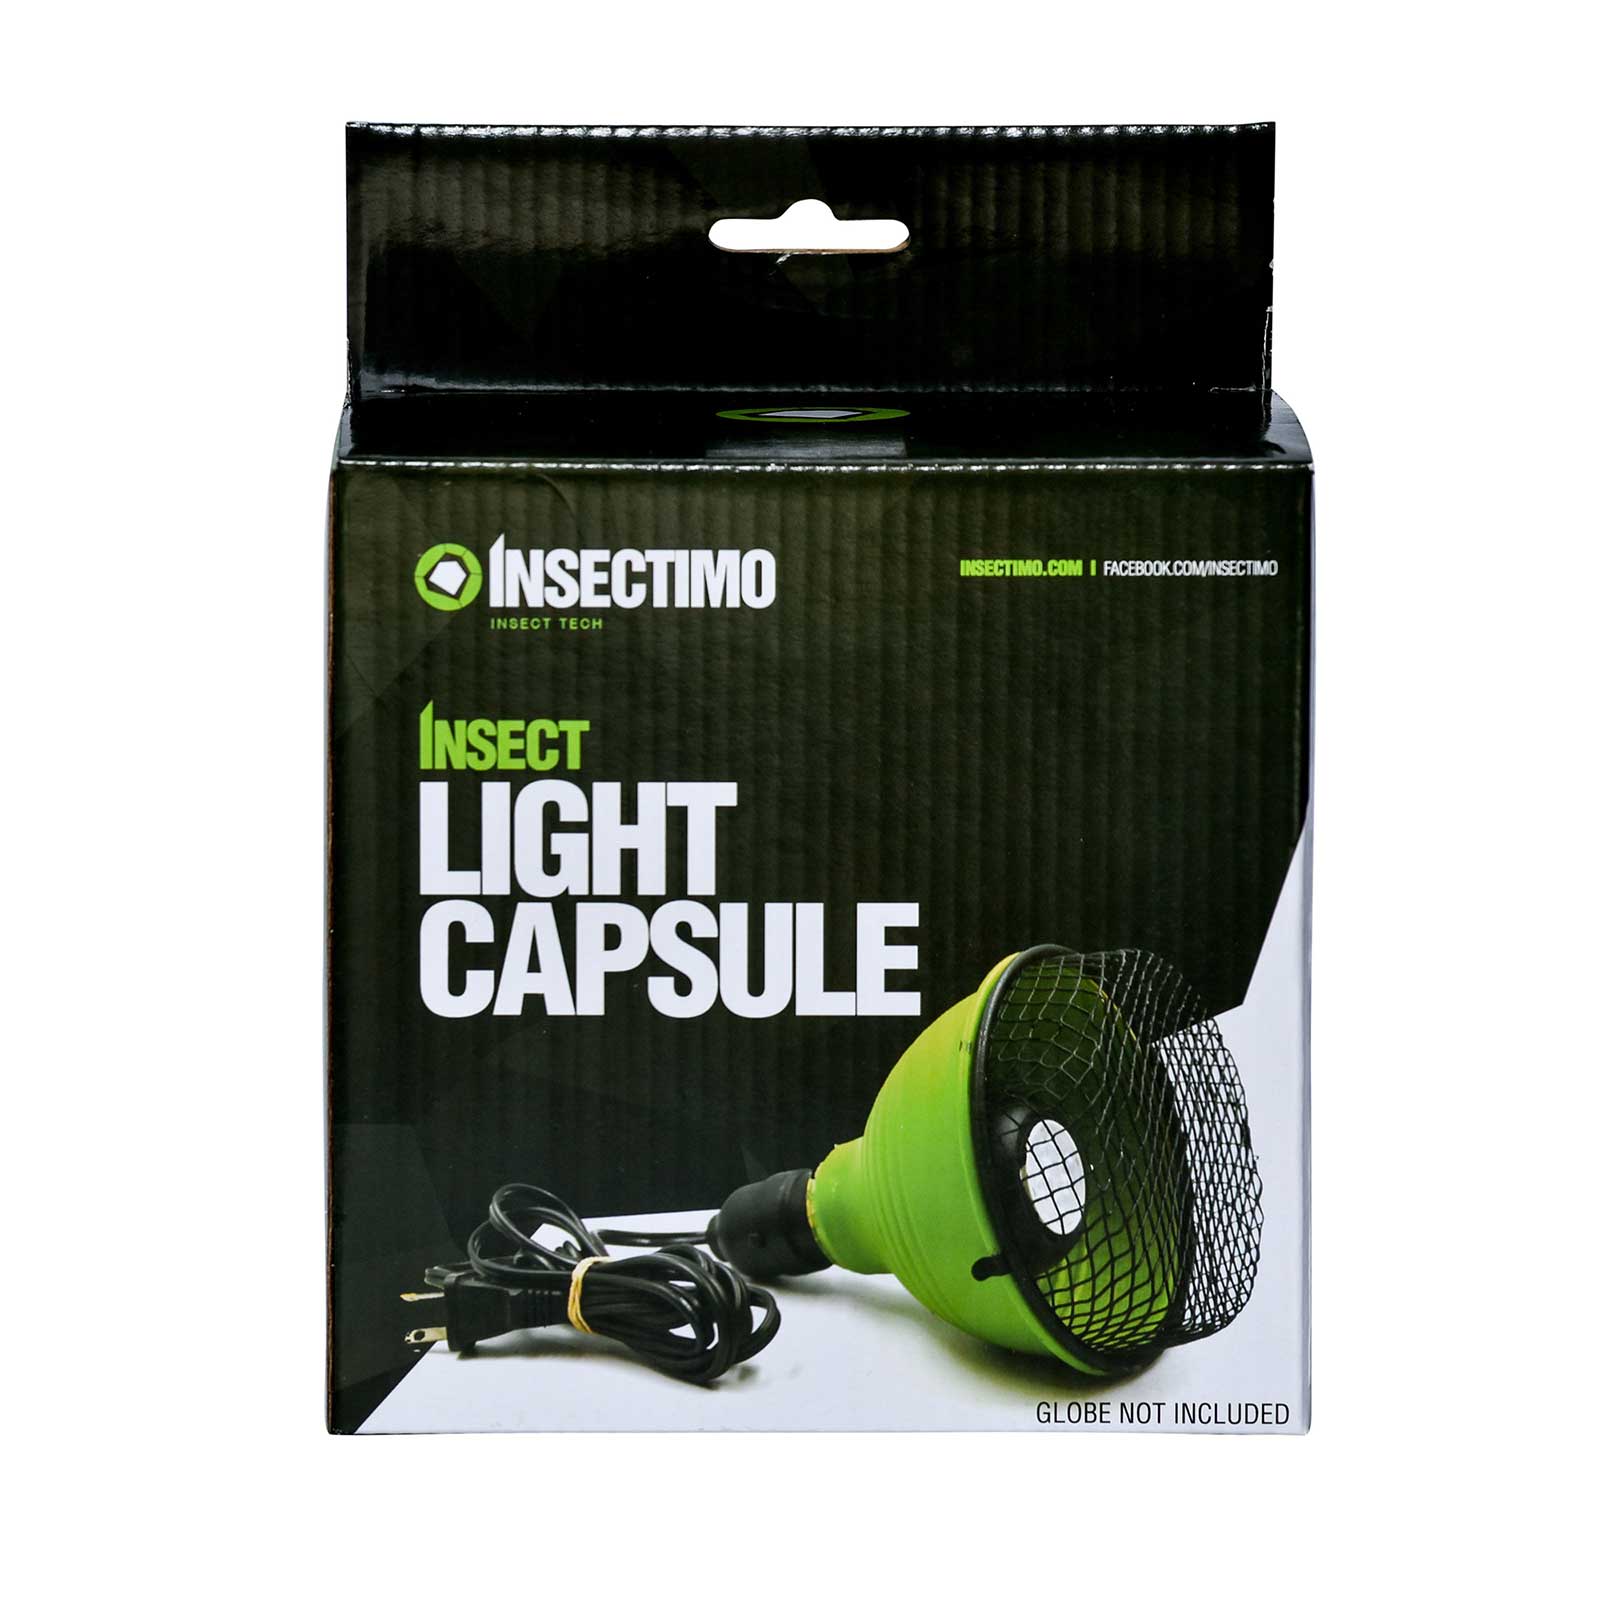 Insectimo Insect Light Capsule